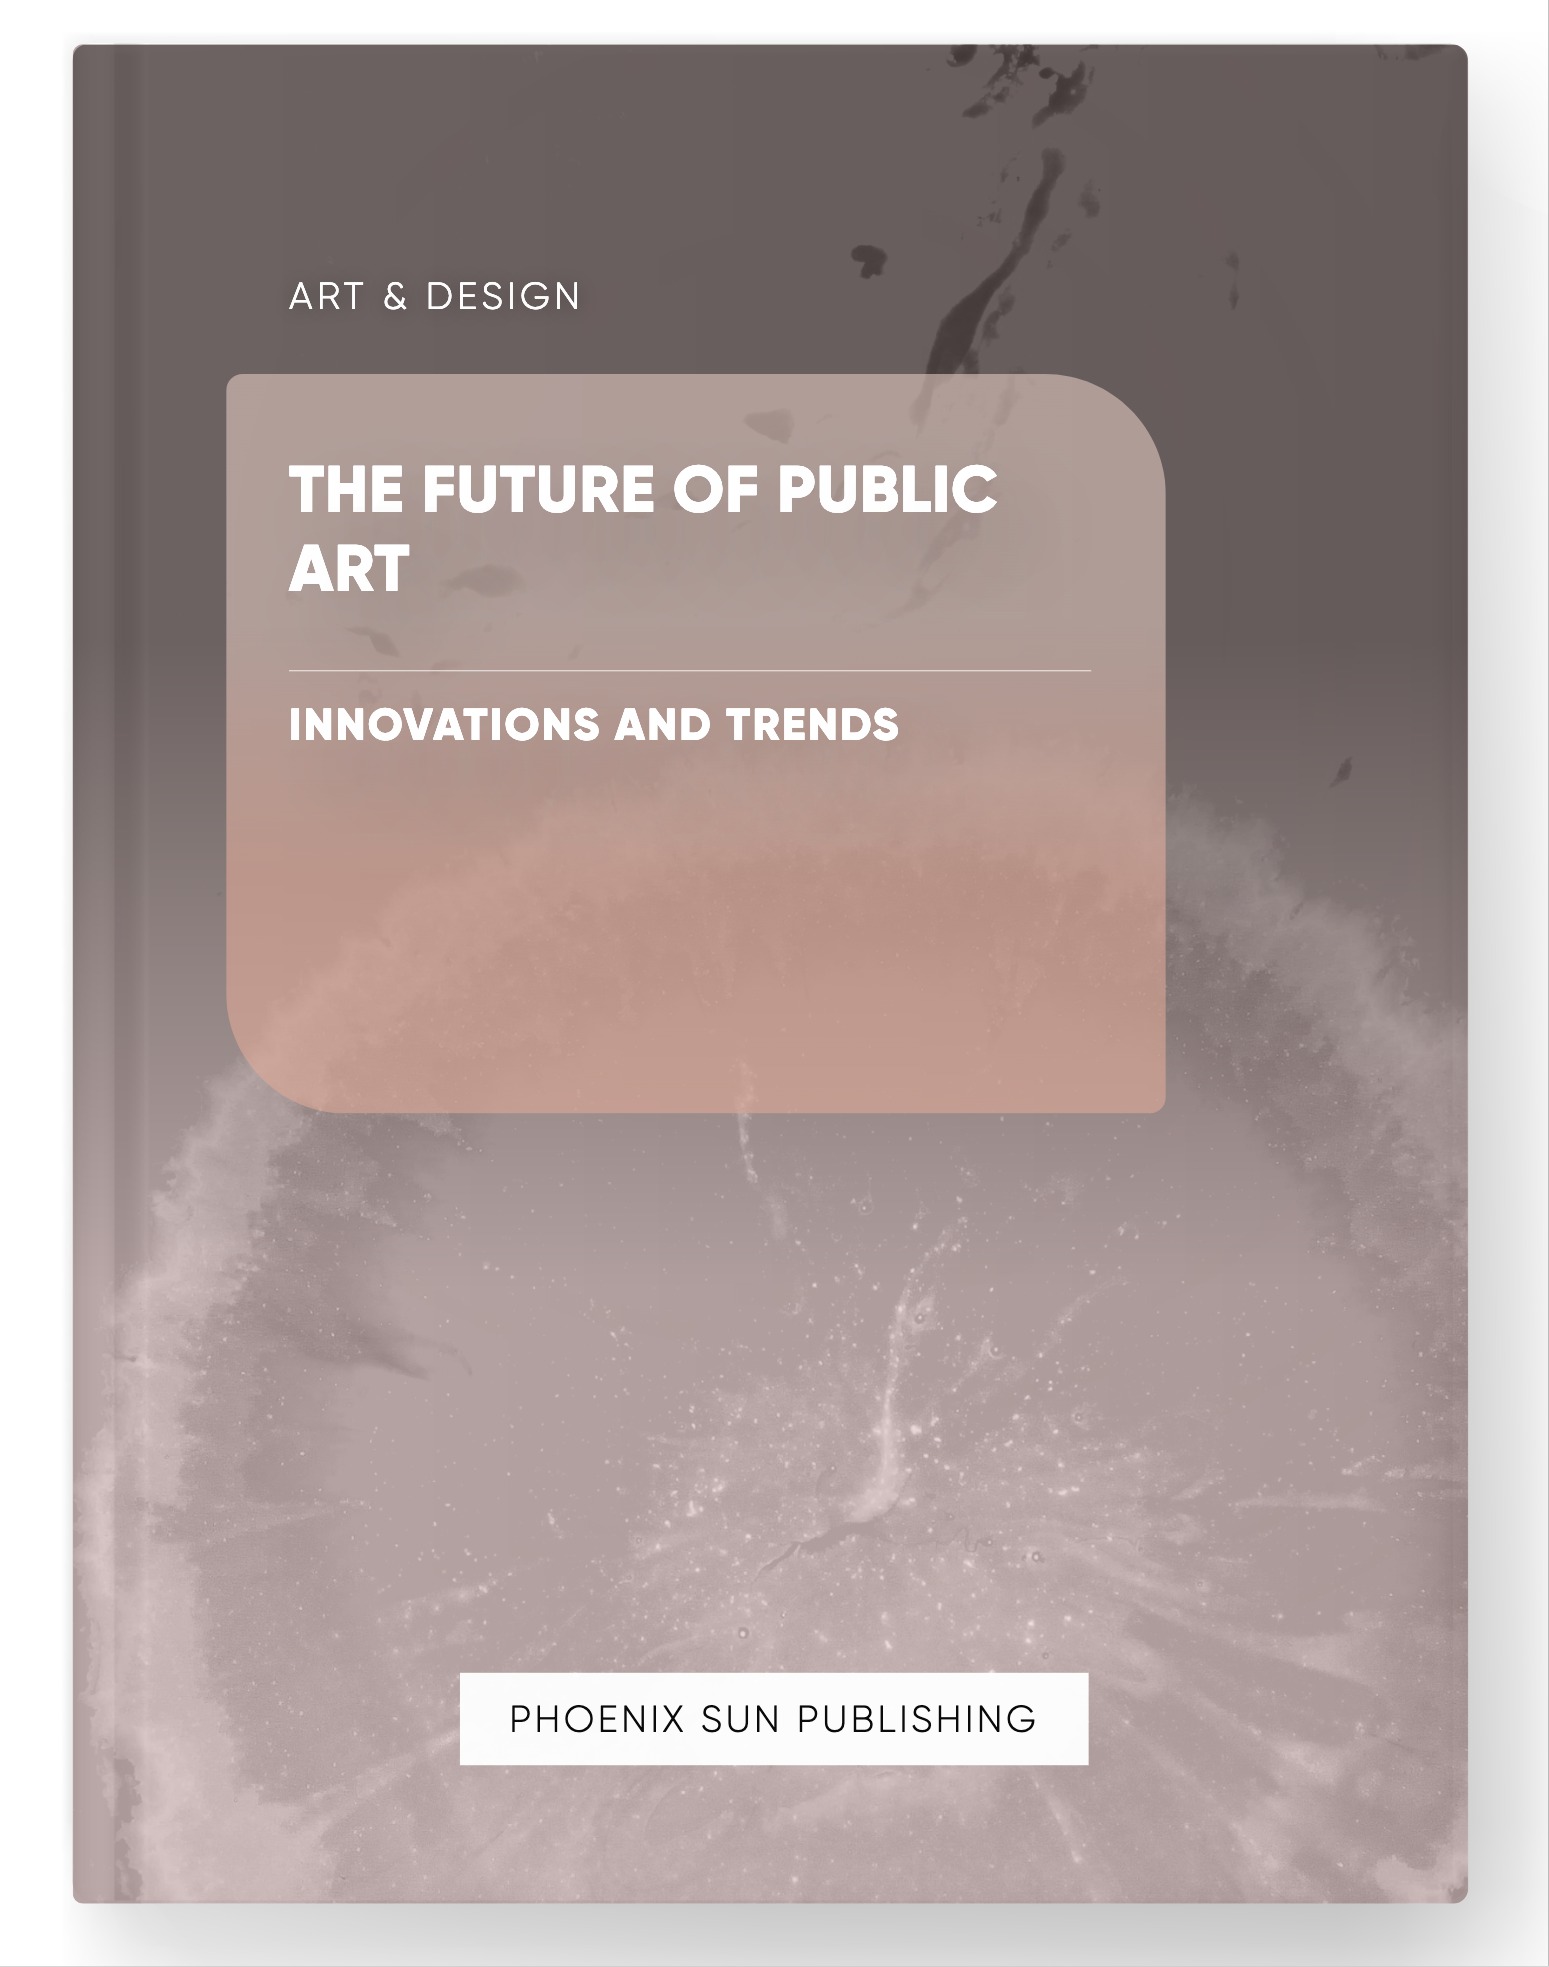 The Future of Public Art – Innovations and Trends